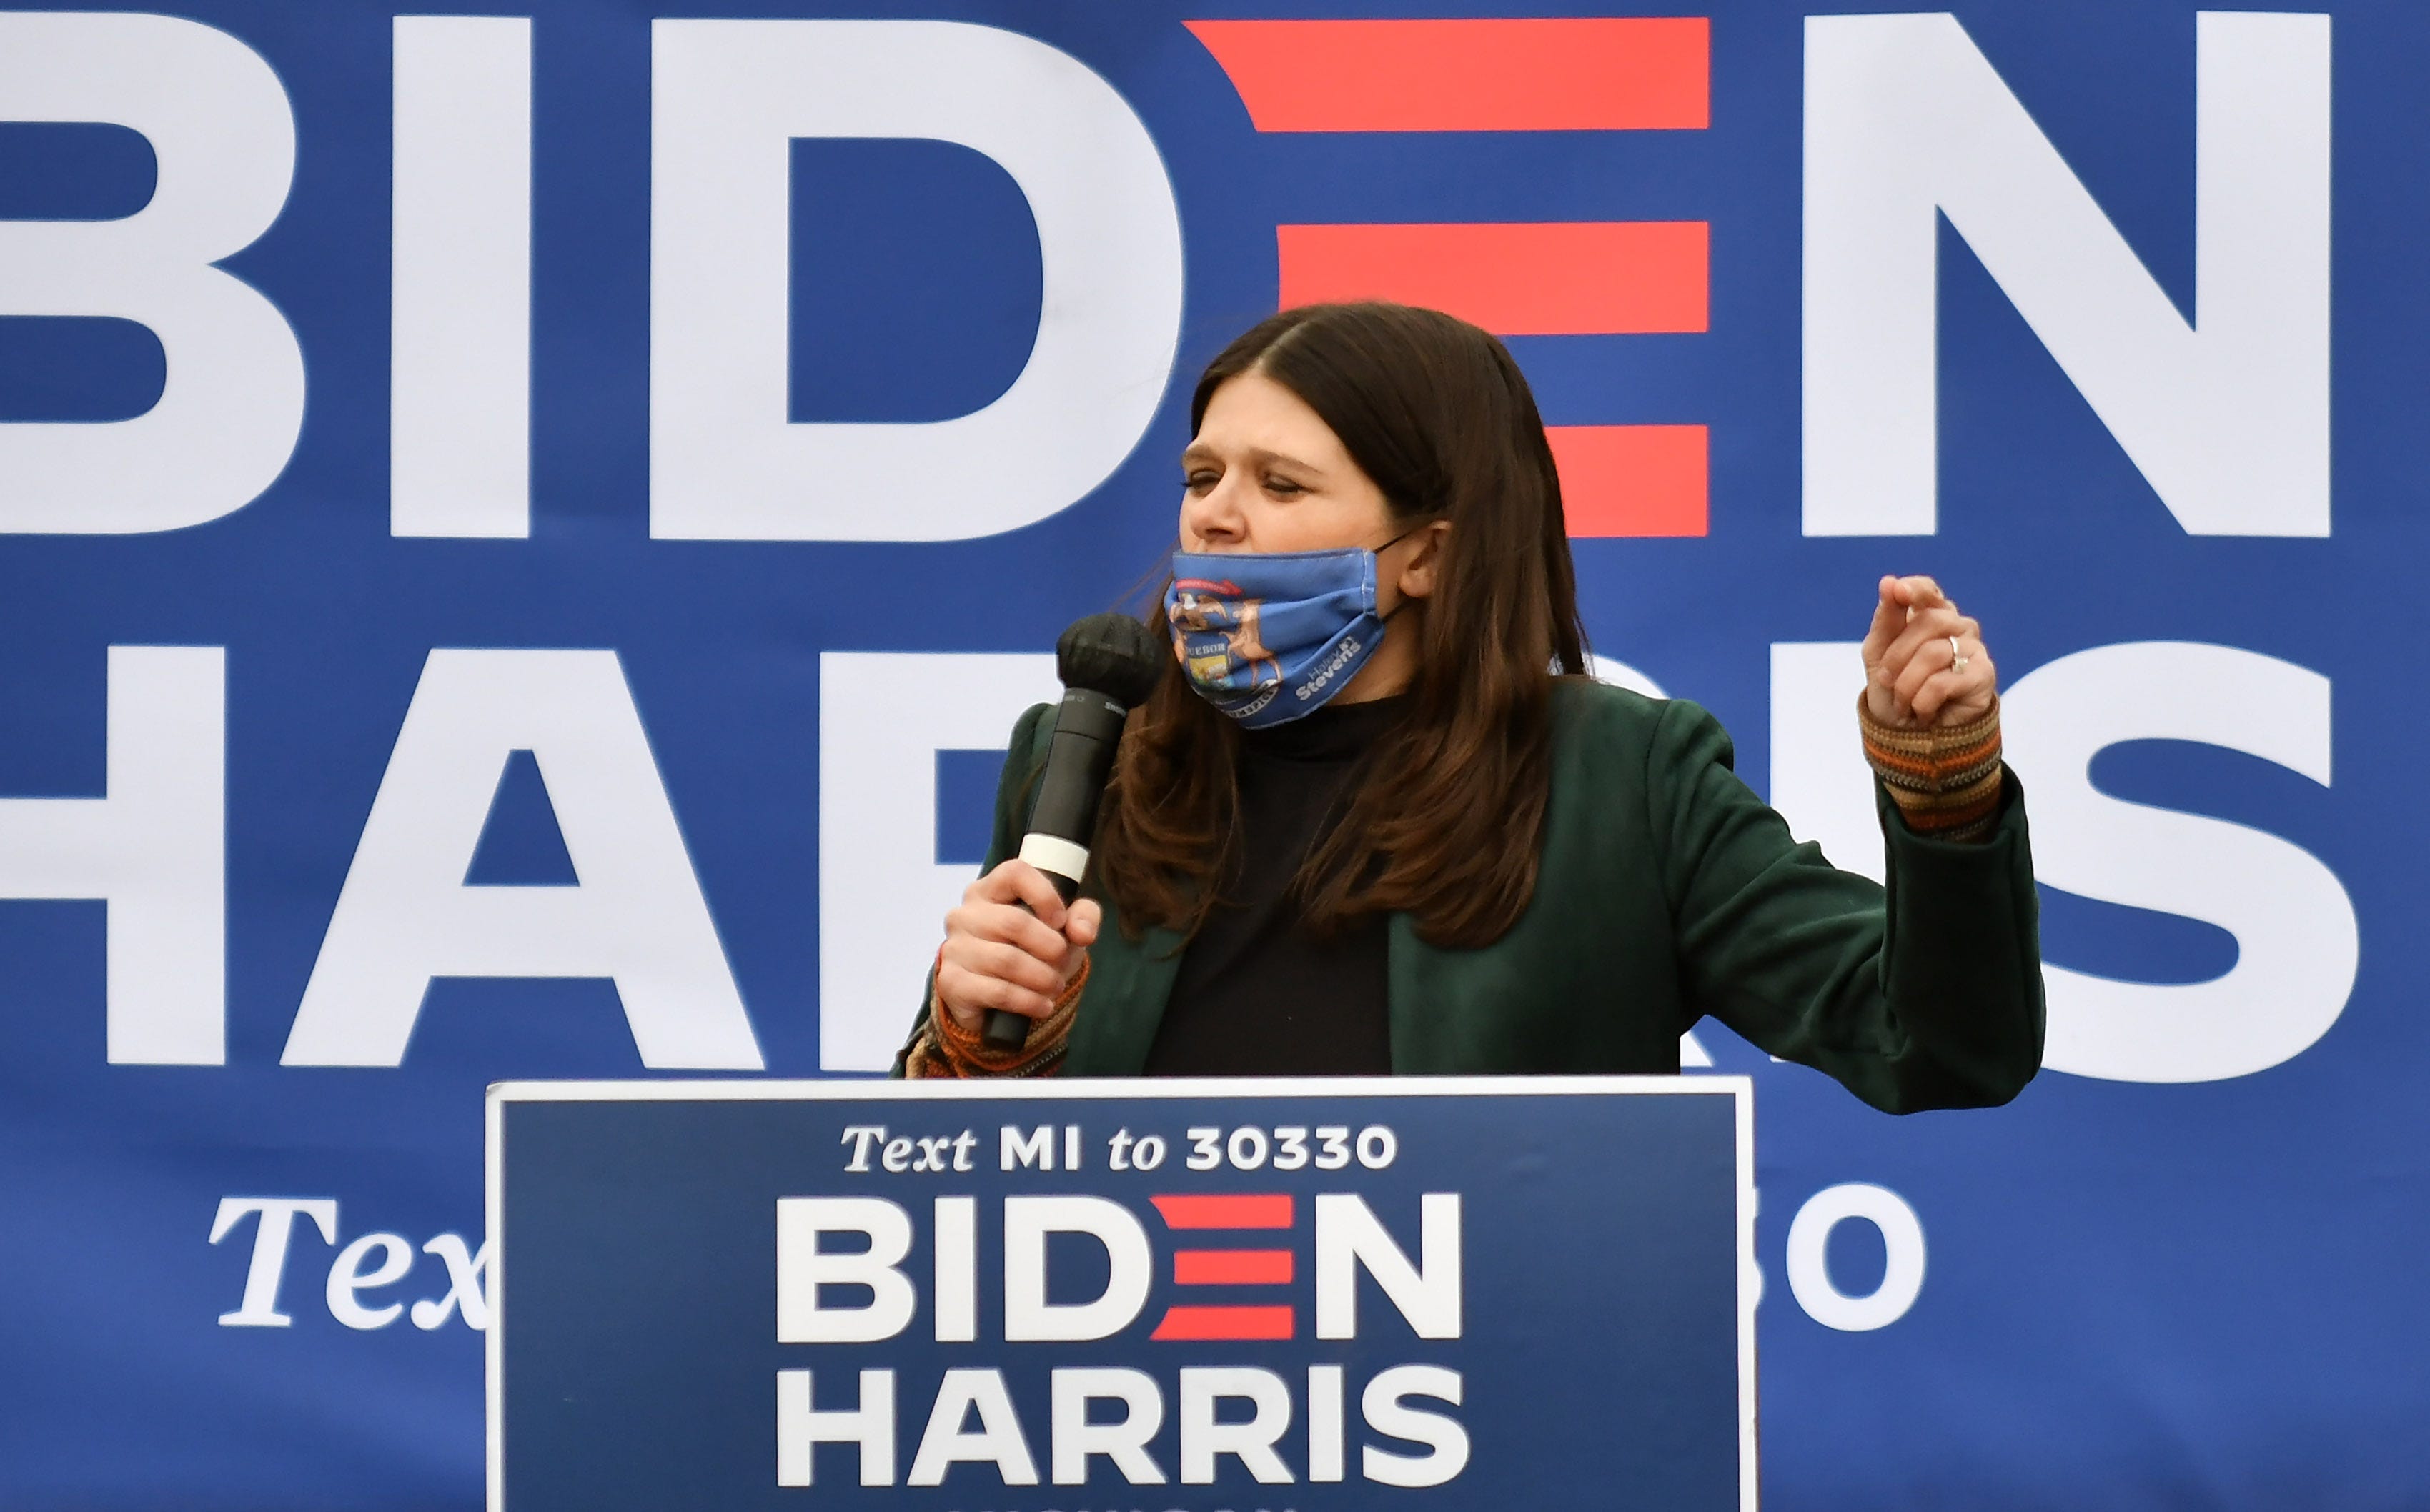 U.S. Rep. Haley Stevens speaks at the Canvass Kickoff event at the Troy Community Center in Troy, Mich. in Detroit on Oct. 25, 2020.